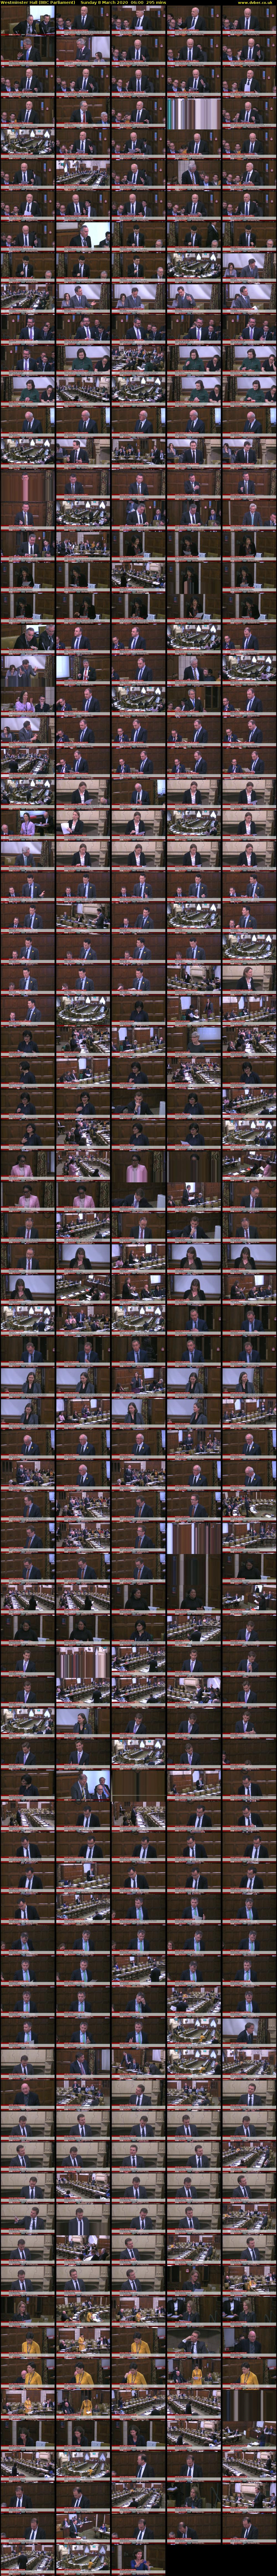 Westminster Hall (BBC Parliament) Sunday 8 March 2020 06:00 - 10:55